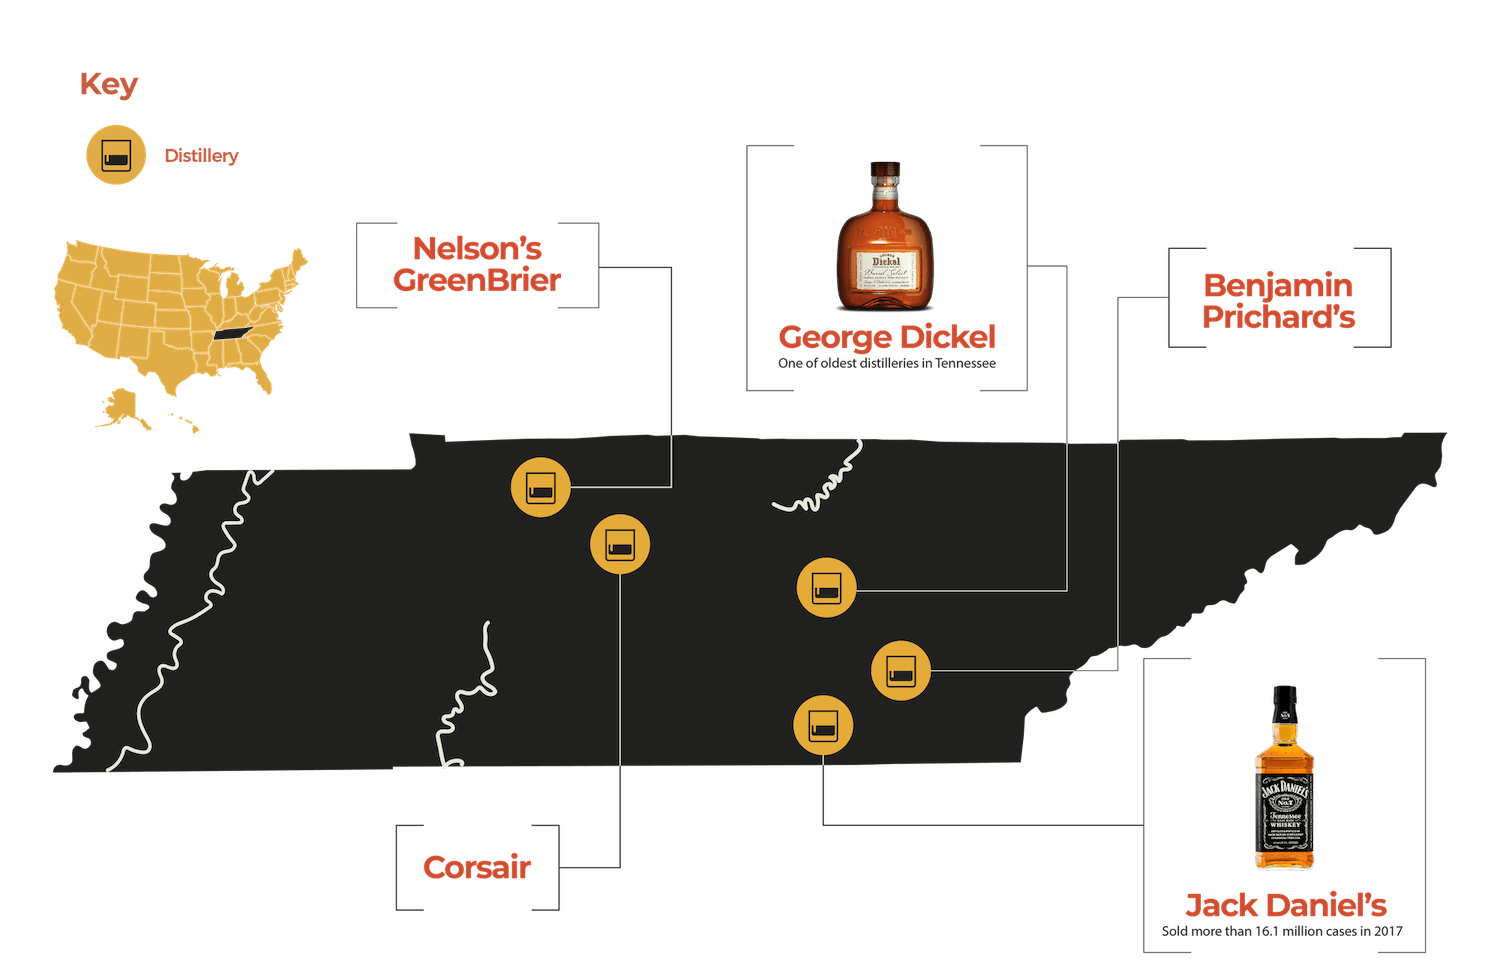 tennessee-whiskey-map.png (1500×980)